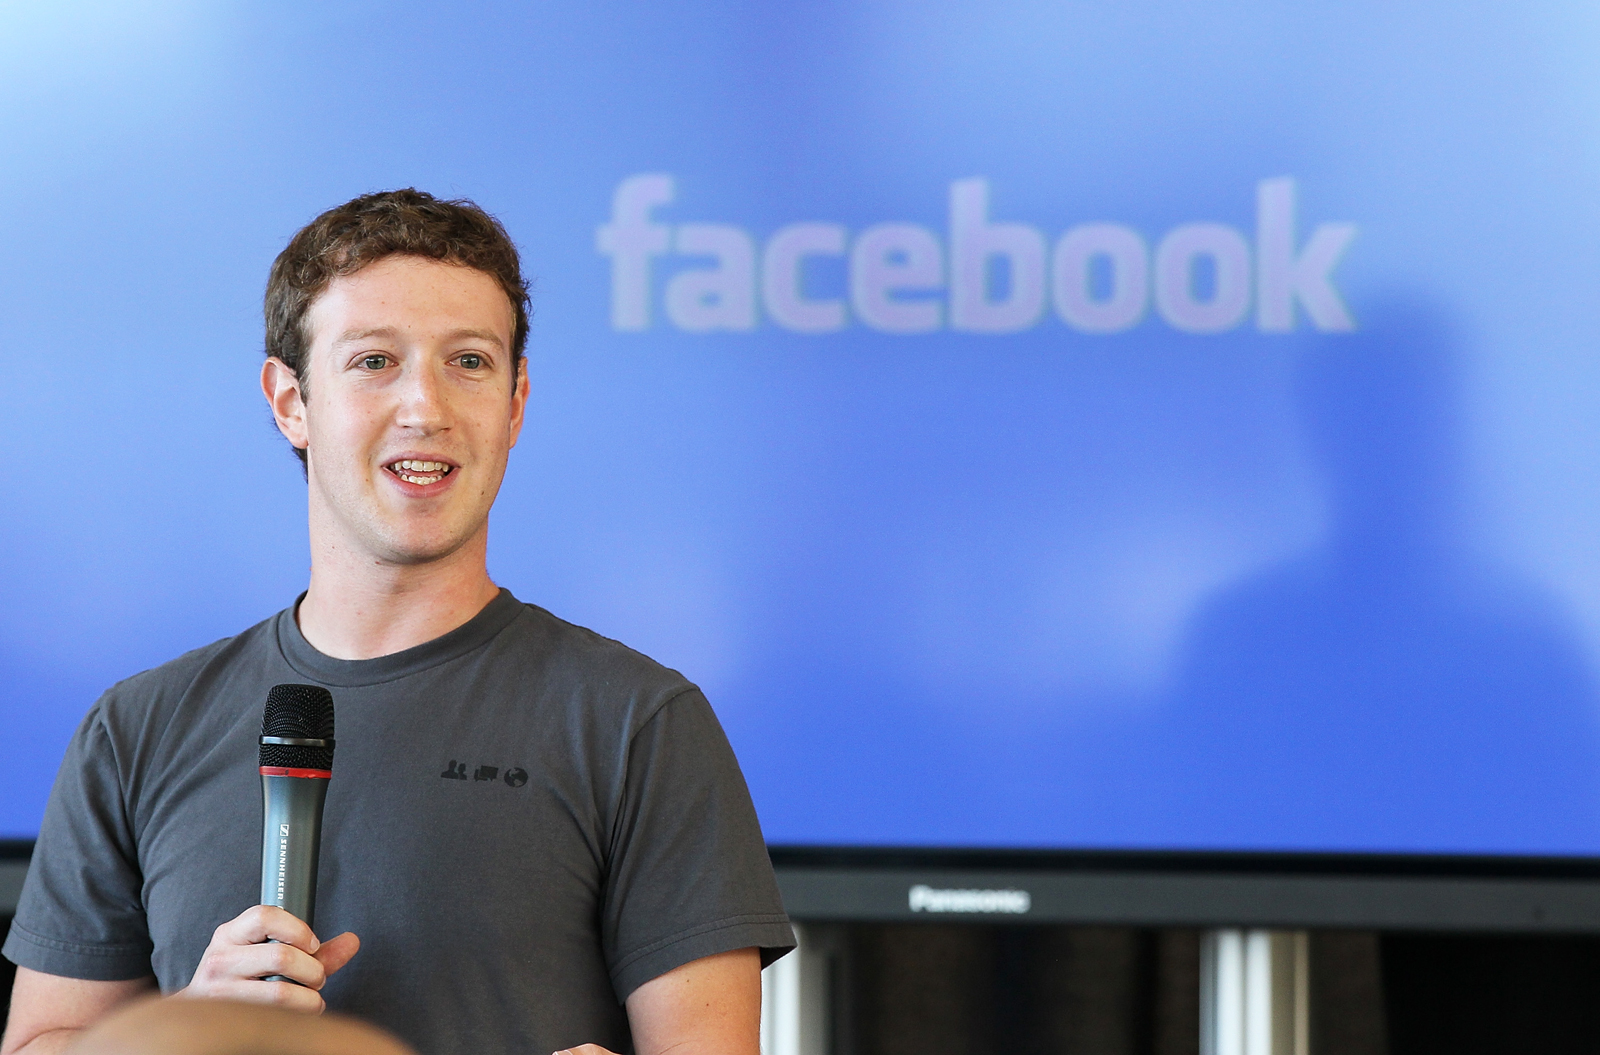 Facebook is planning to rebrand the company with a new name - Knwoledge World